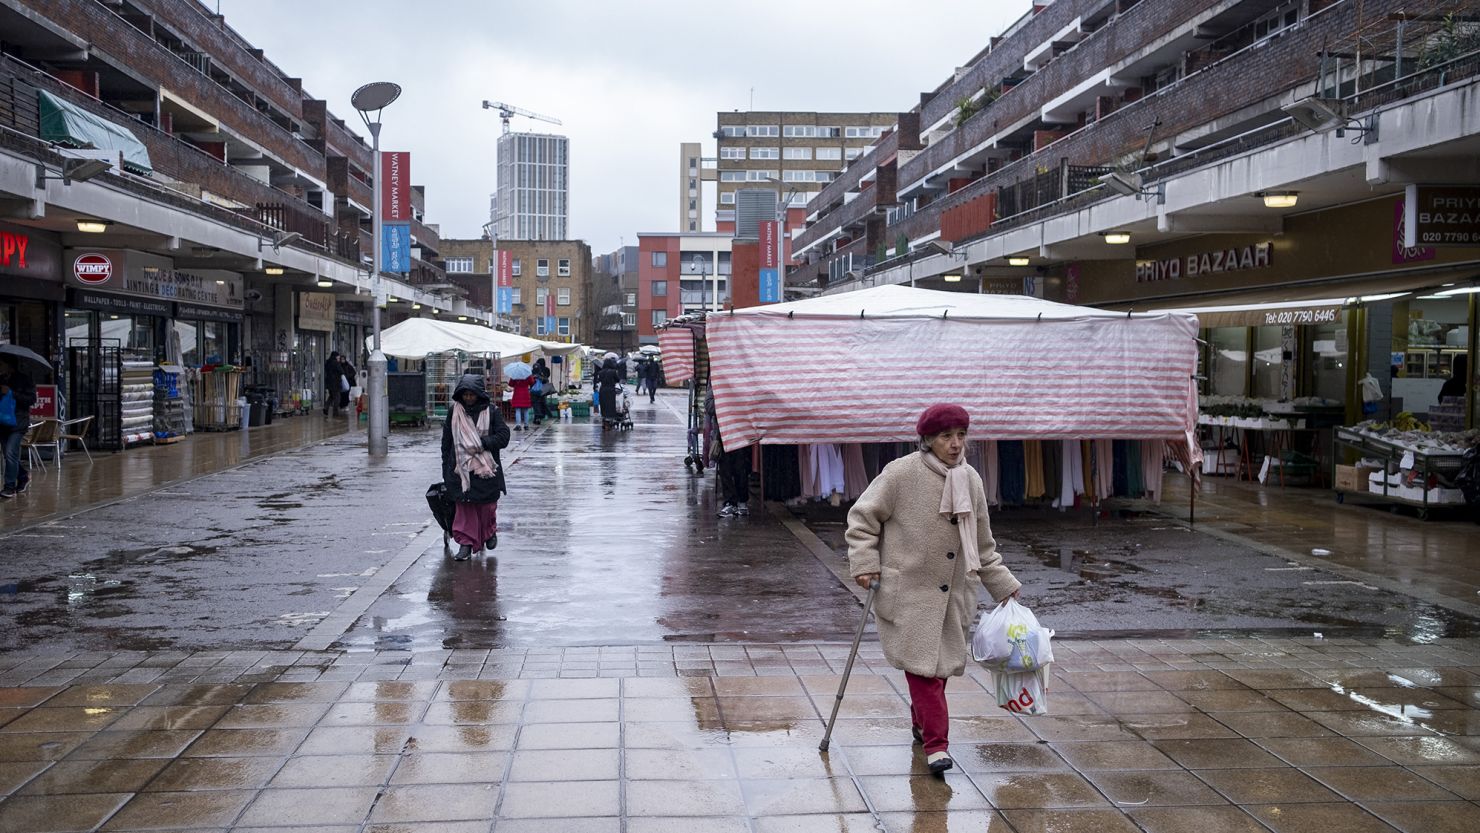 People pictured in the market area on Watney Street in Shadwell, London on March 8, 2023.